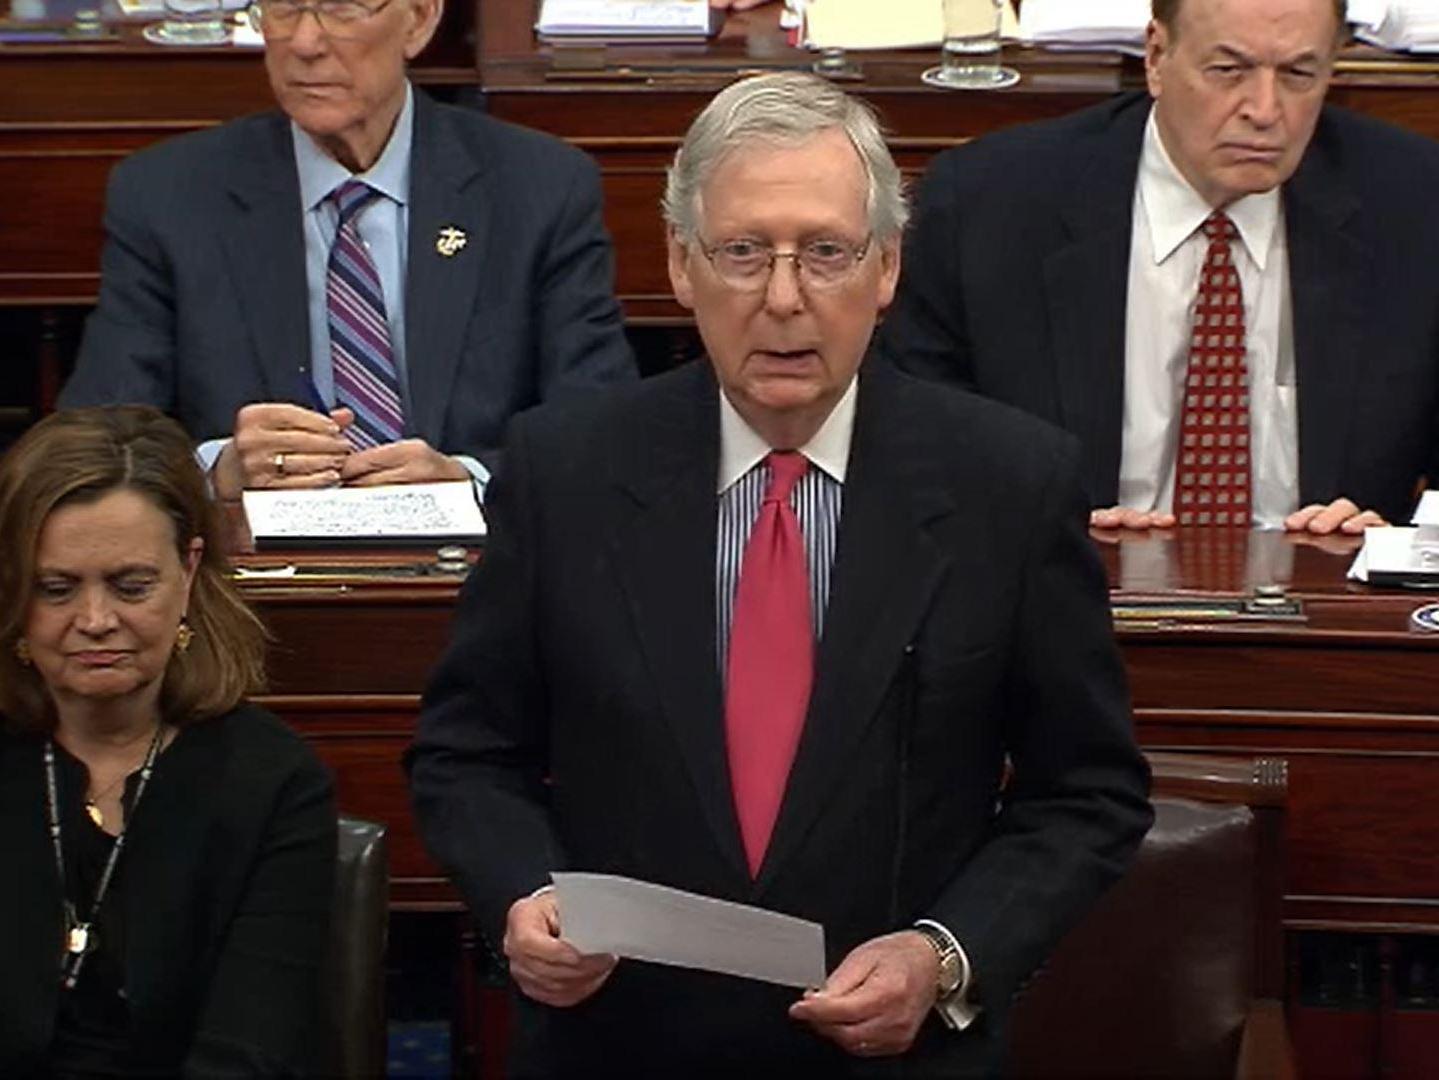 Related video: Mitch McConell calls election interference fears 'modern day McCarthyism'